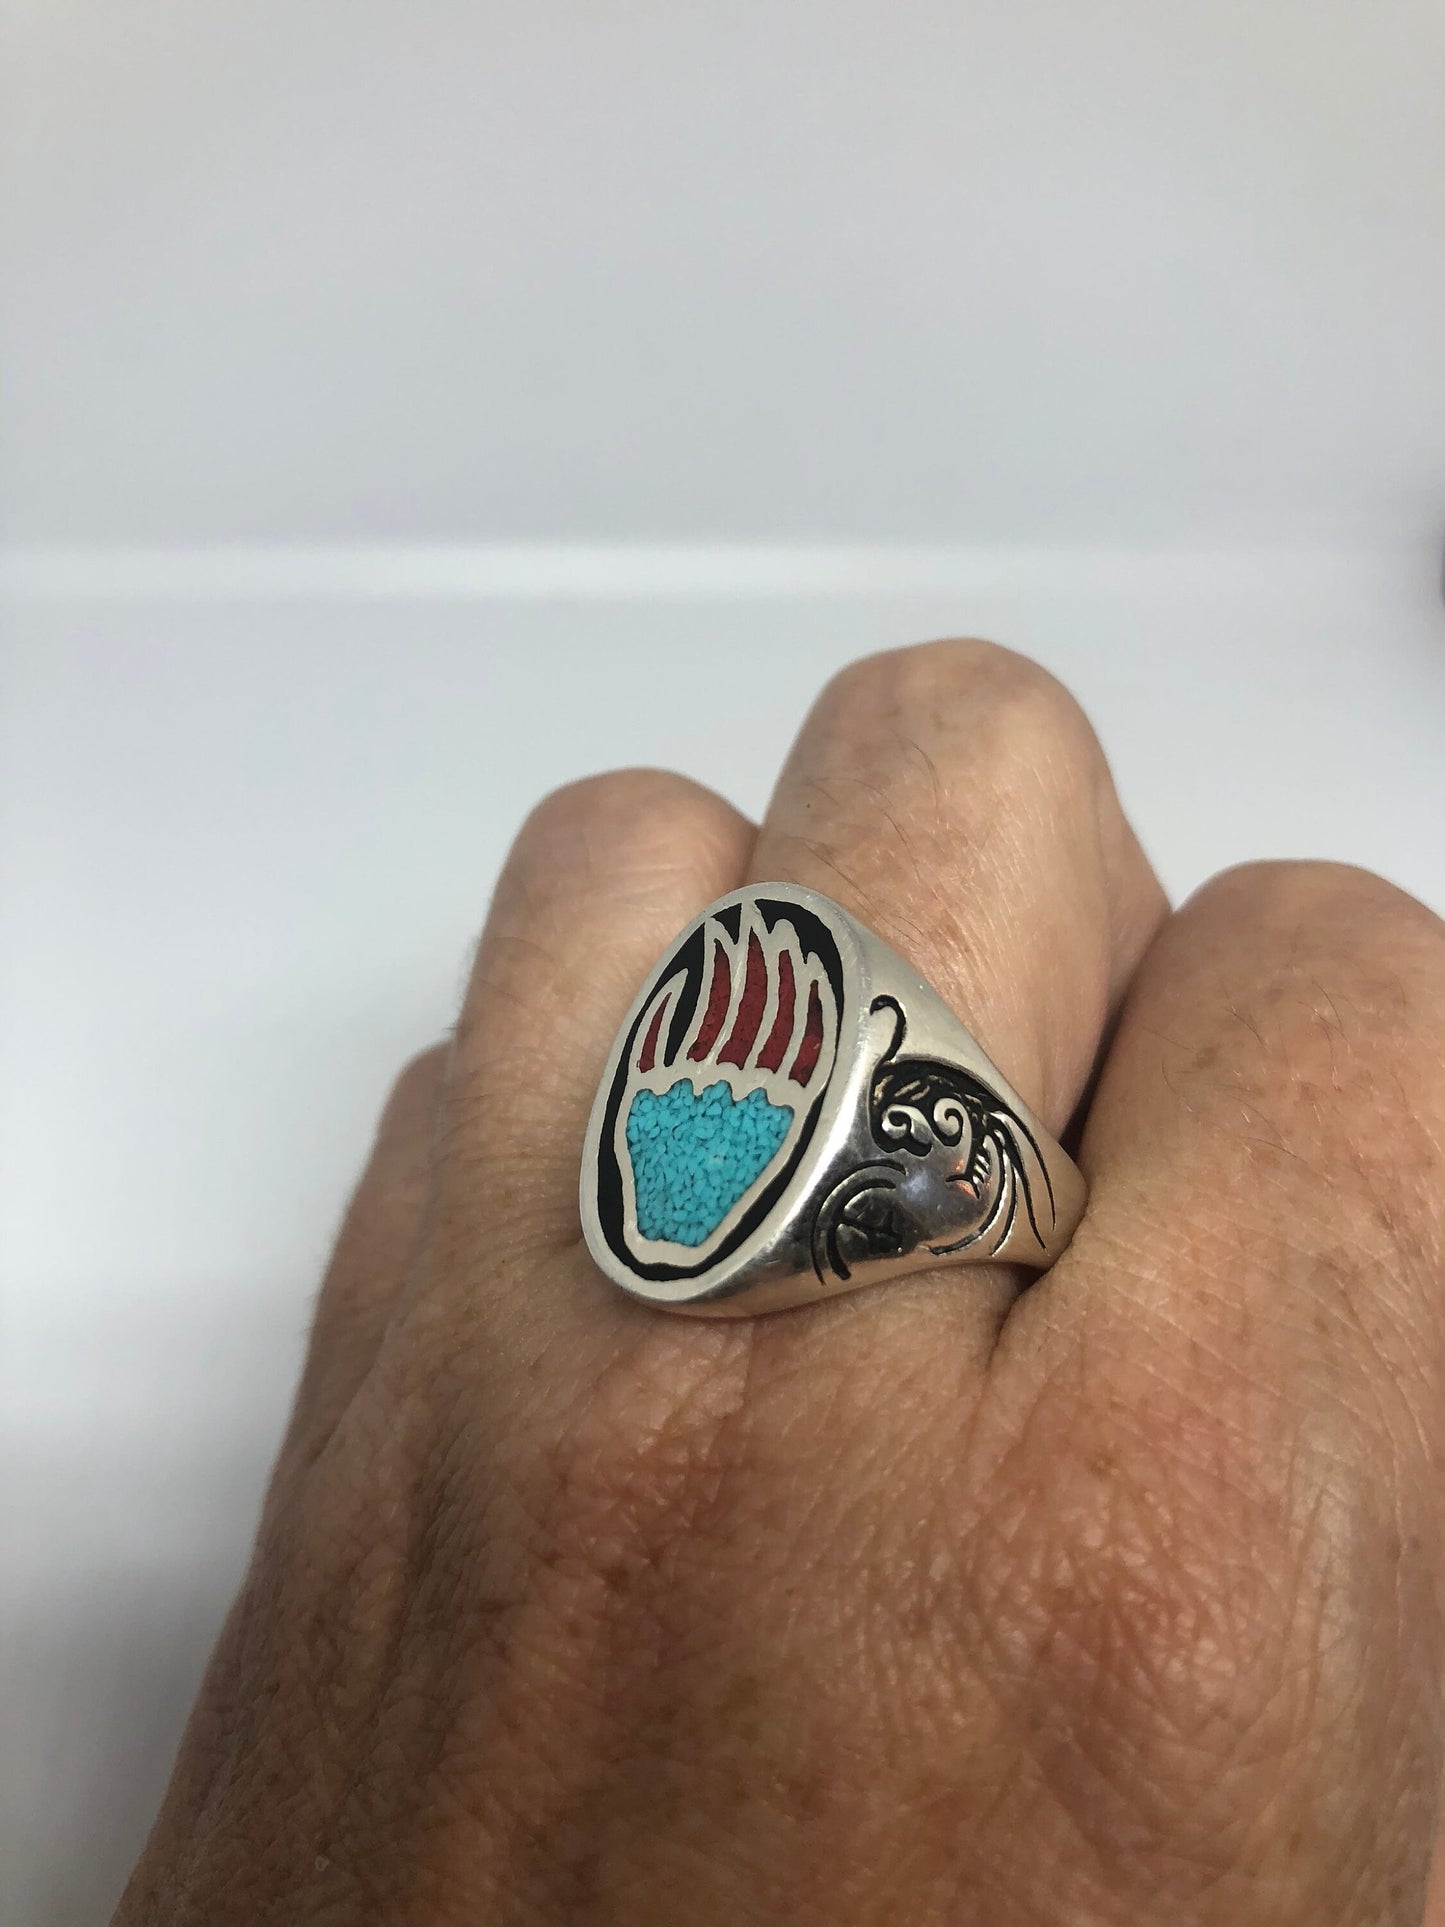 Vintage Native American Southwestern Style Turquoise Stone Inlay Mens Bear Paw Ring